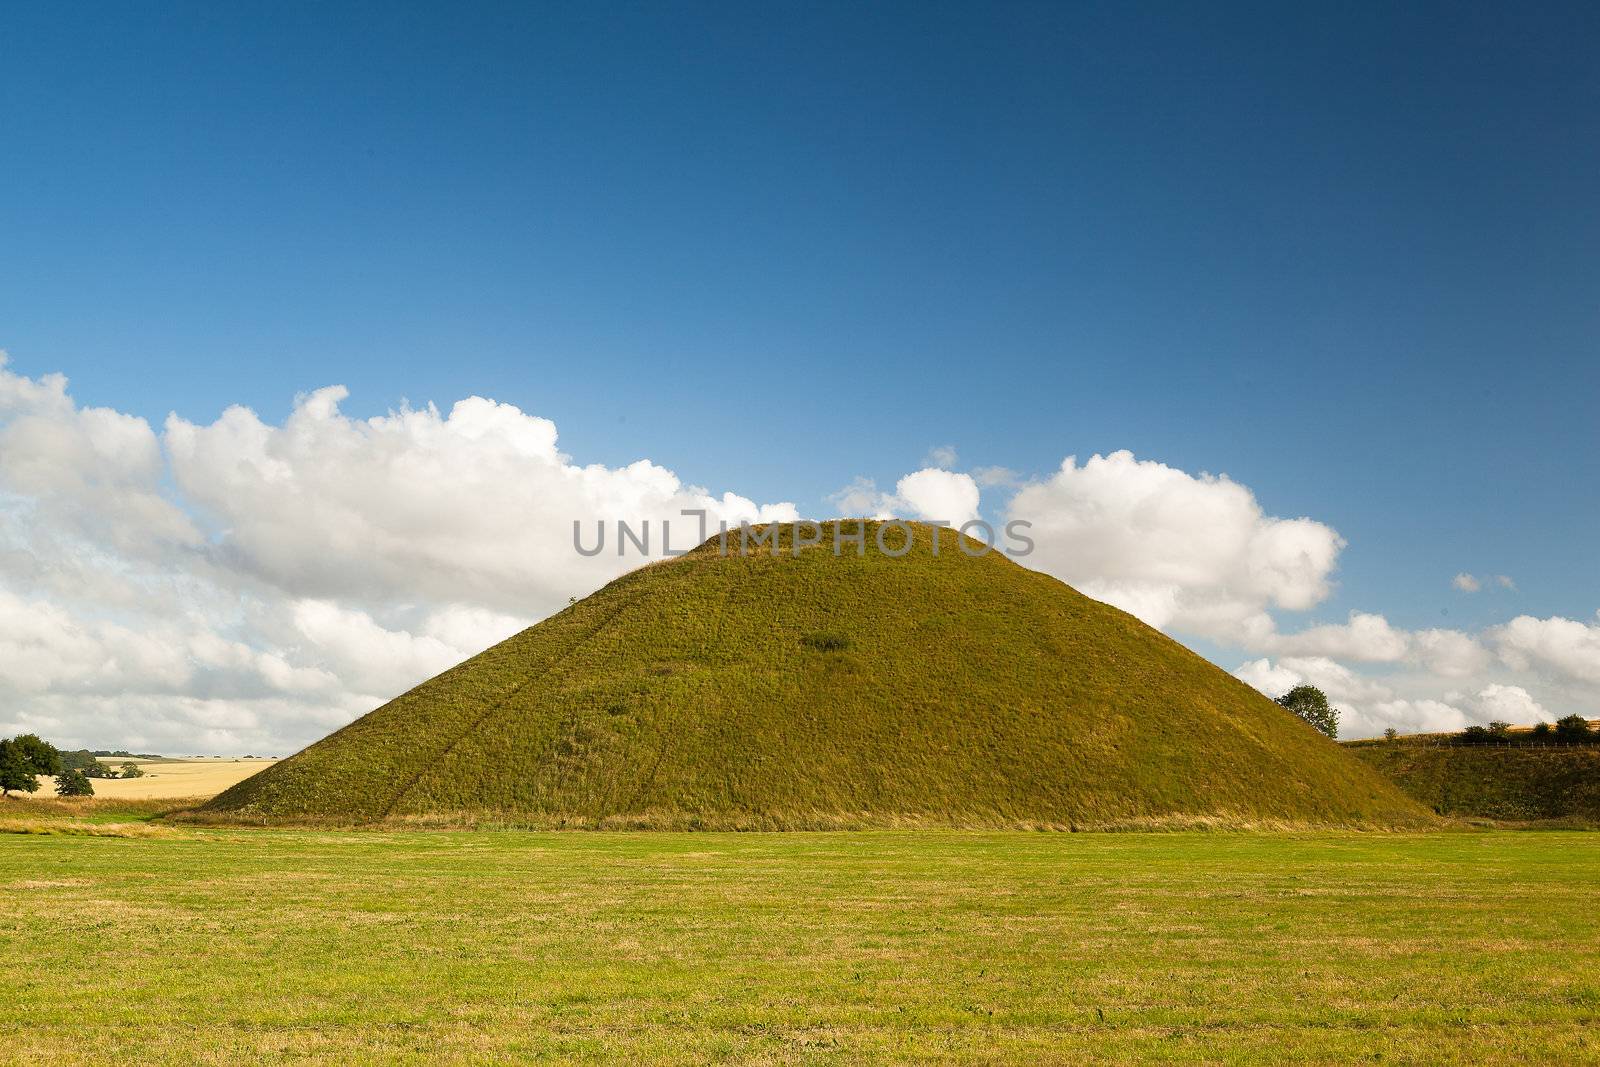 The mystic Silbury Hill in Great Britain